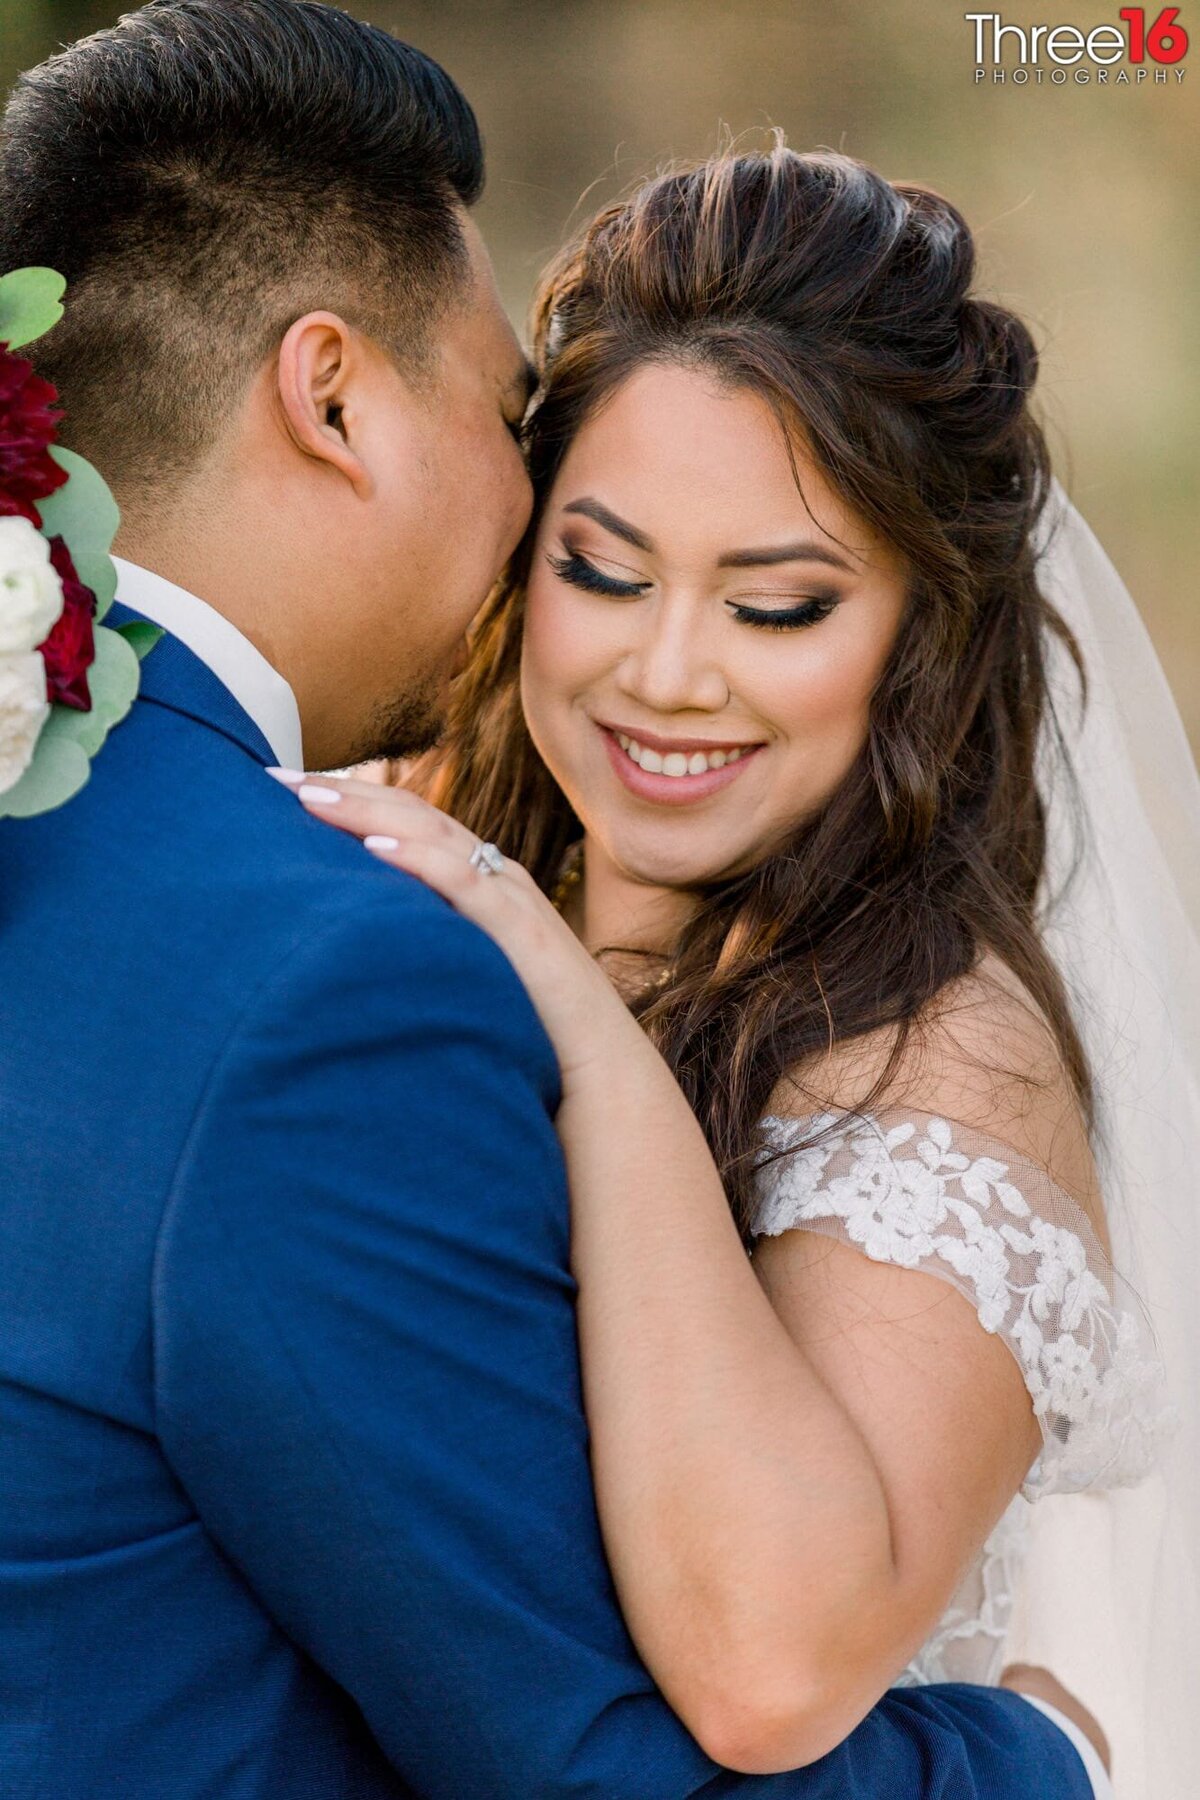 Bride and Groom embrace each other as the Groom whispers into her ear